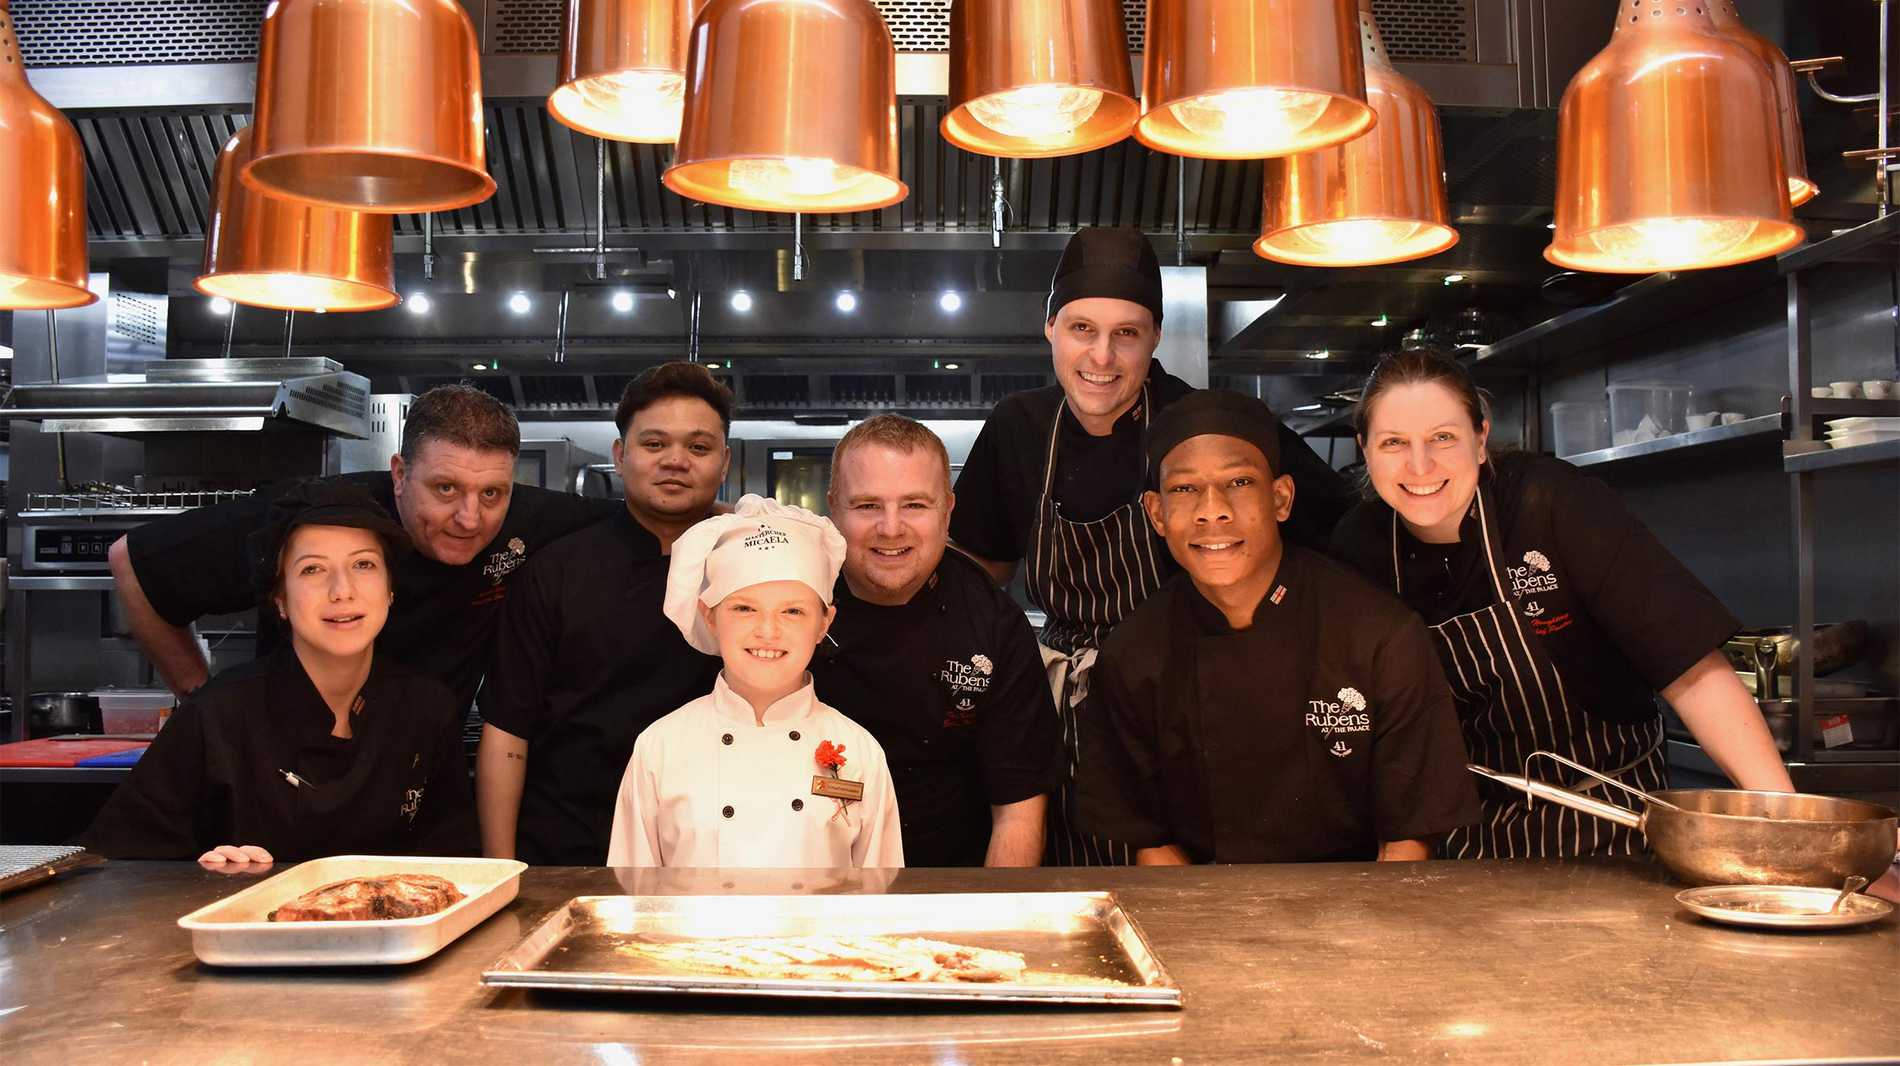 A group photo of Micaela and the Reubens Hotel's catering staff in the hotel kitchen.